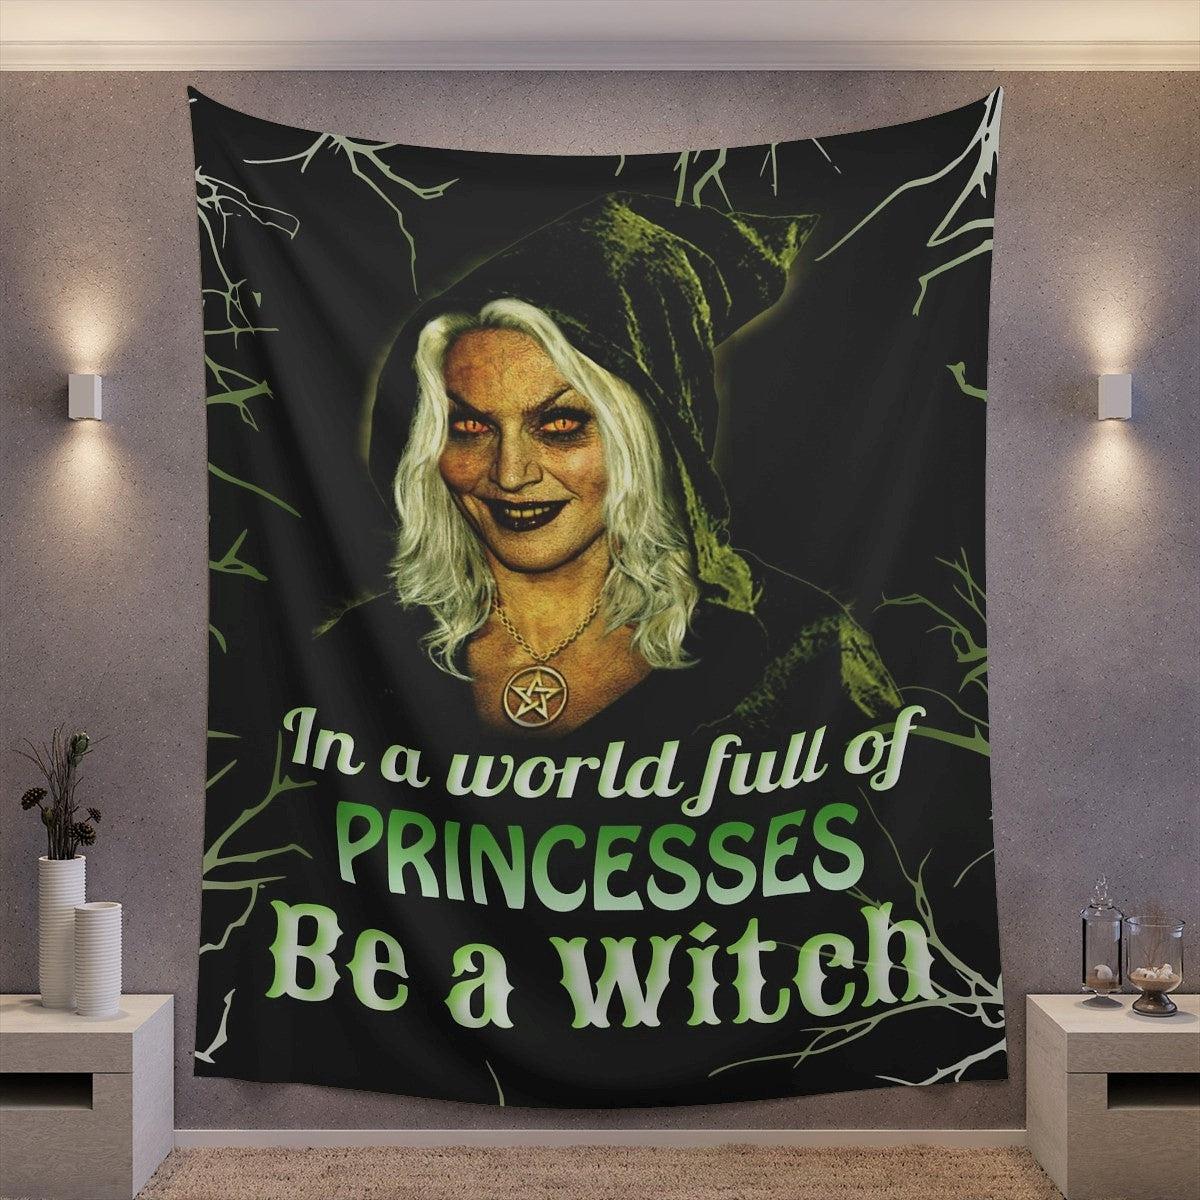 Be a witch tapestry Halloween tapestry-MoonChildWorld